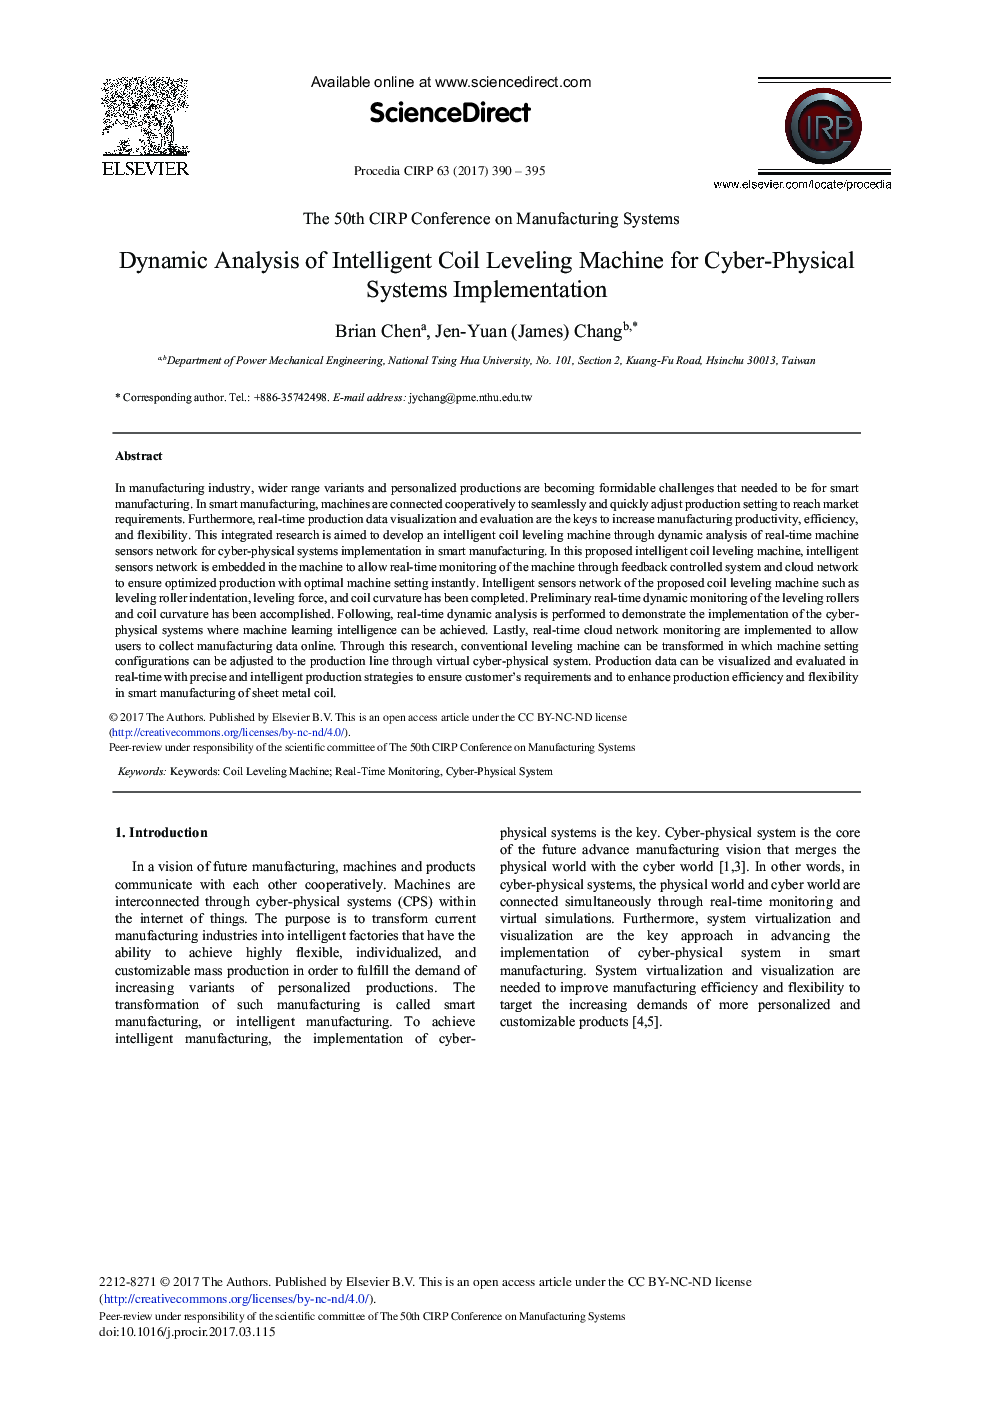 Dynamic Analysis of Intelligent Coil Leveling Machine for Cyber-physical Systems Implementation